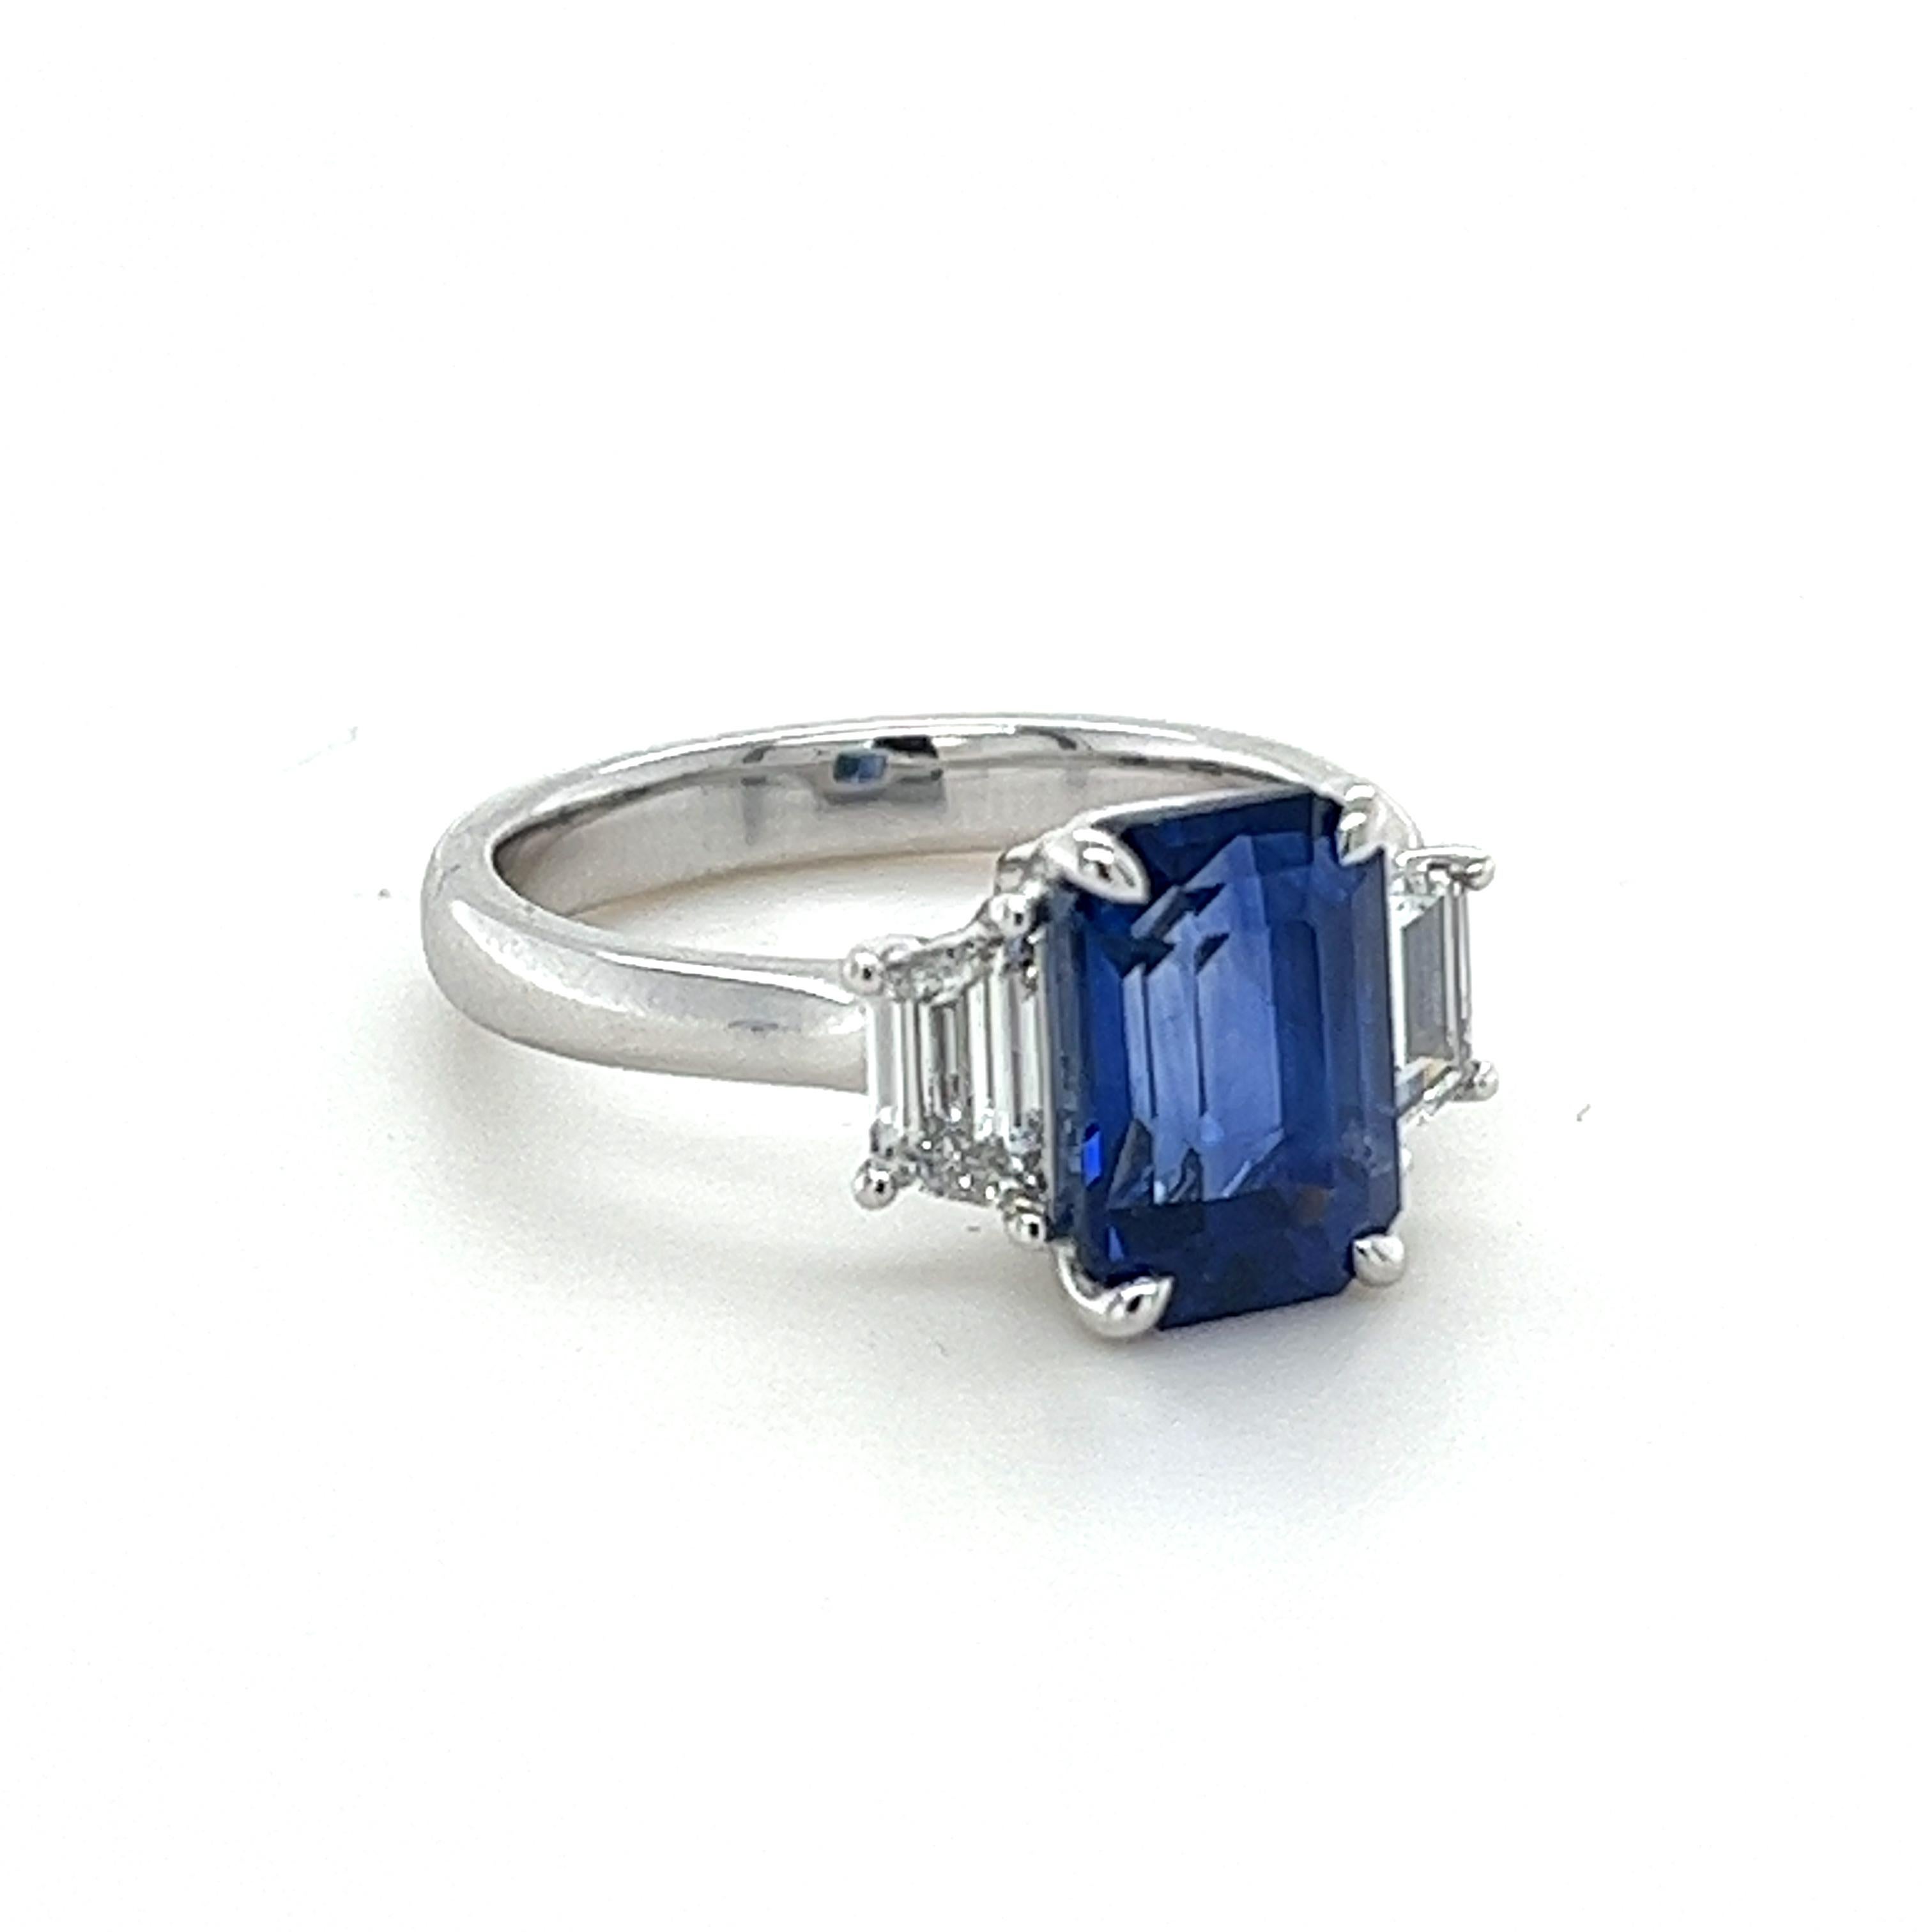 GIA certified Emerald Cut Ceylon Sapphire weighing 3.82 carats
Measuring (9.98x6.82x5.44) mm
Diamonds weighing .68 carats
Diamonds are F-VS
Set in platinum ring
7.63 grams